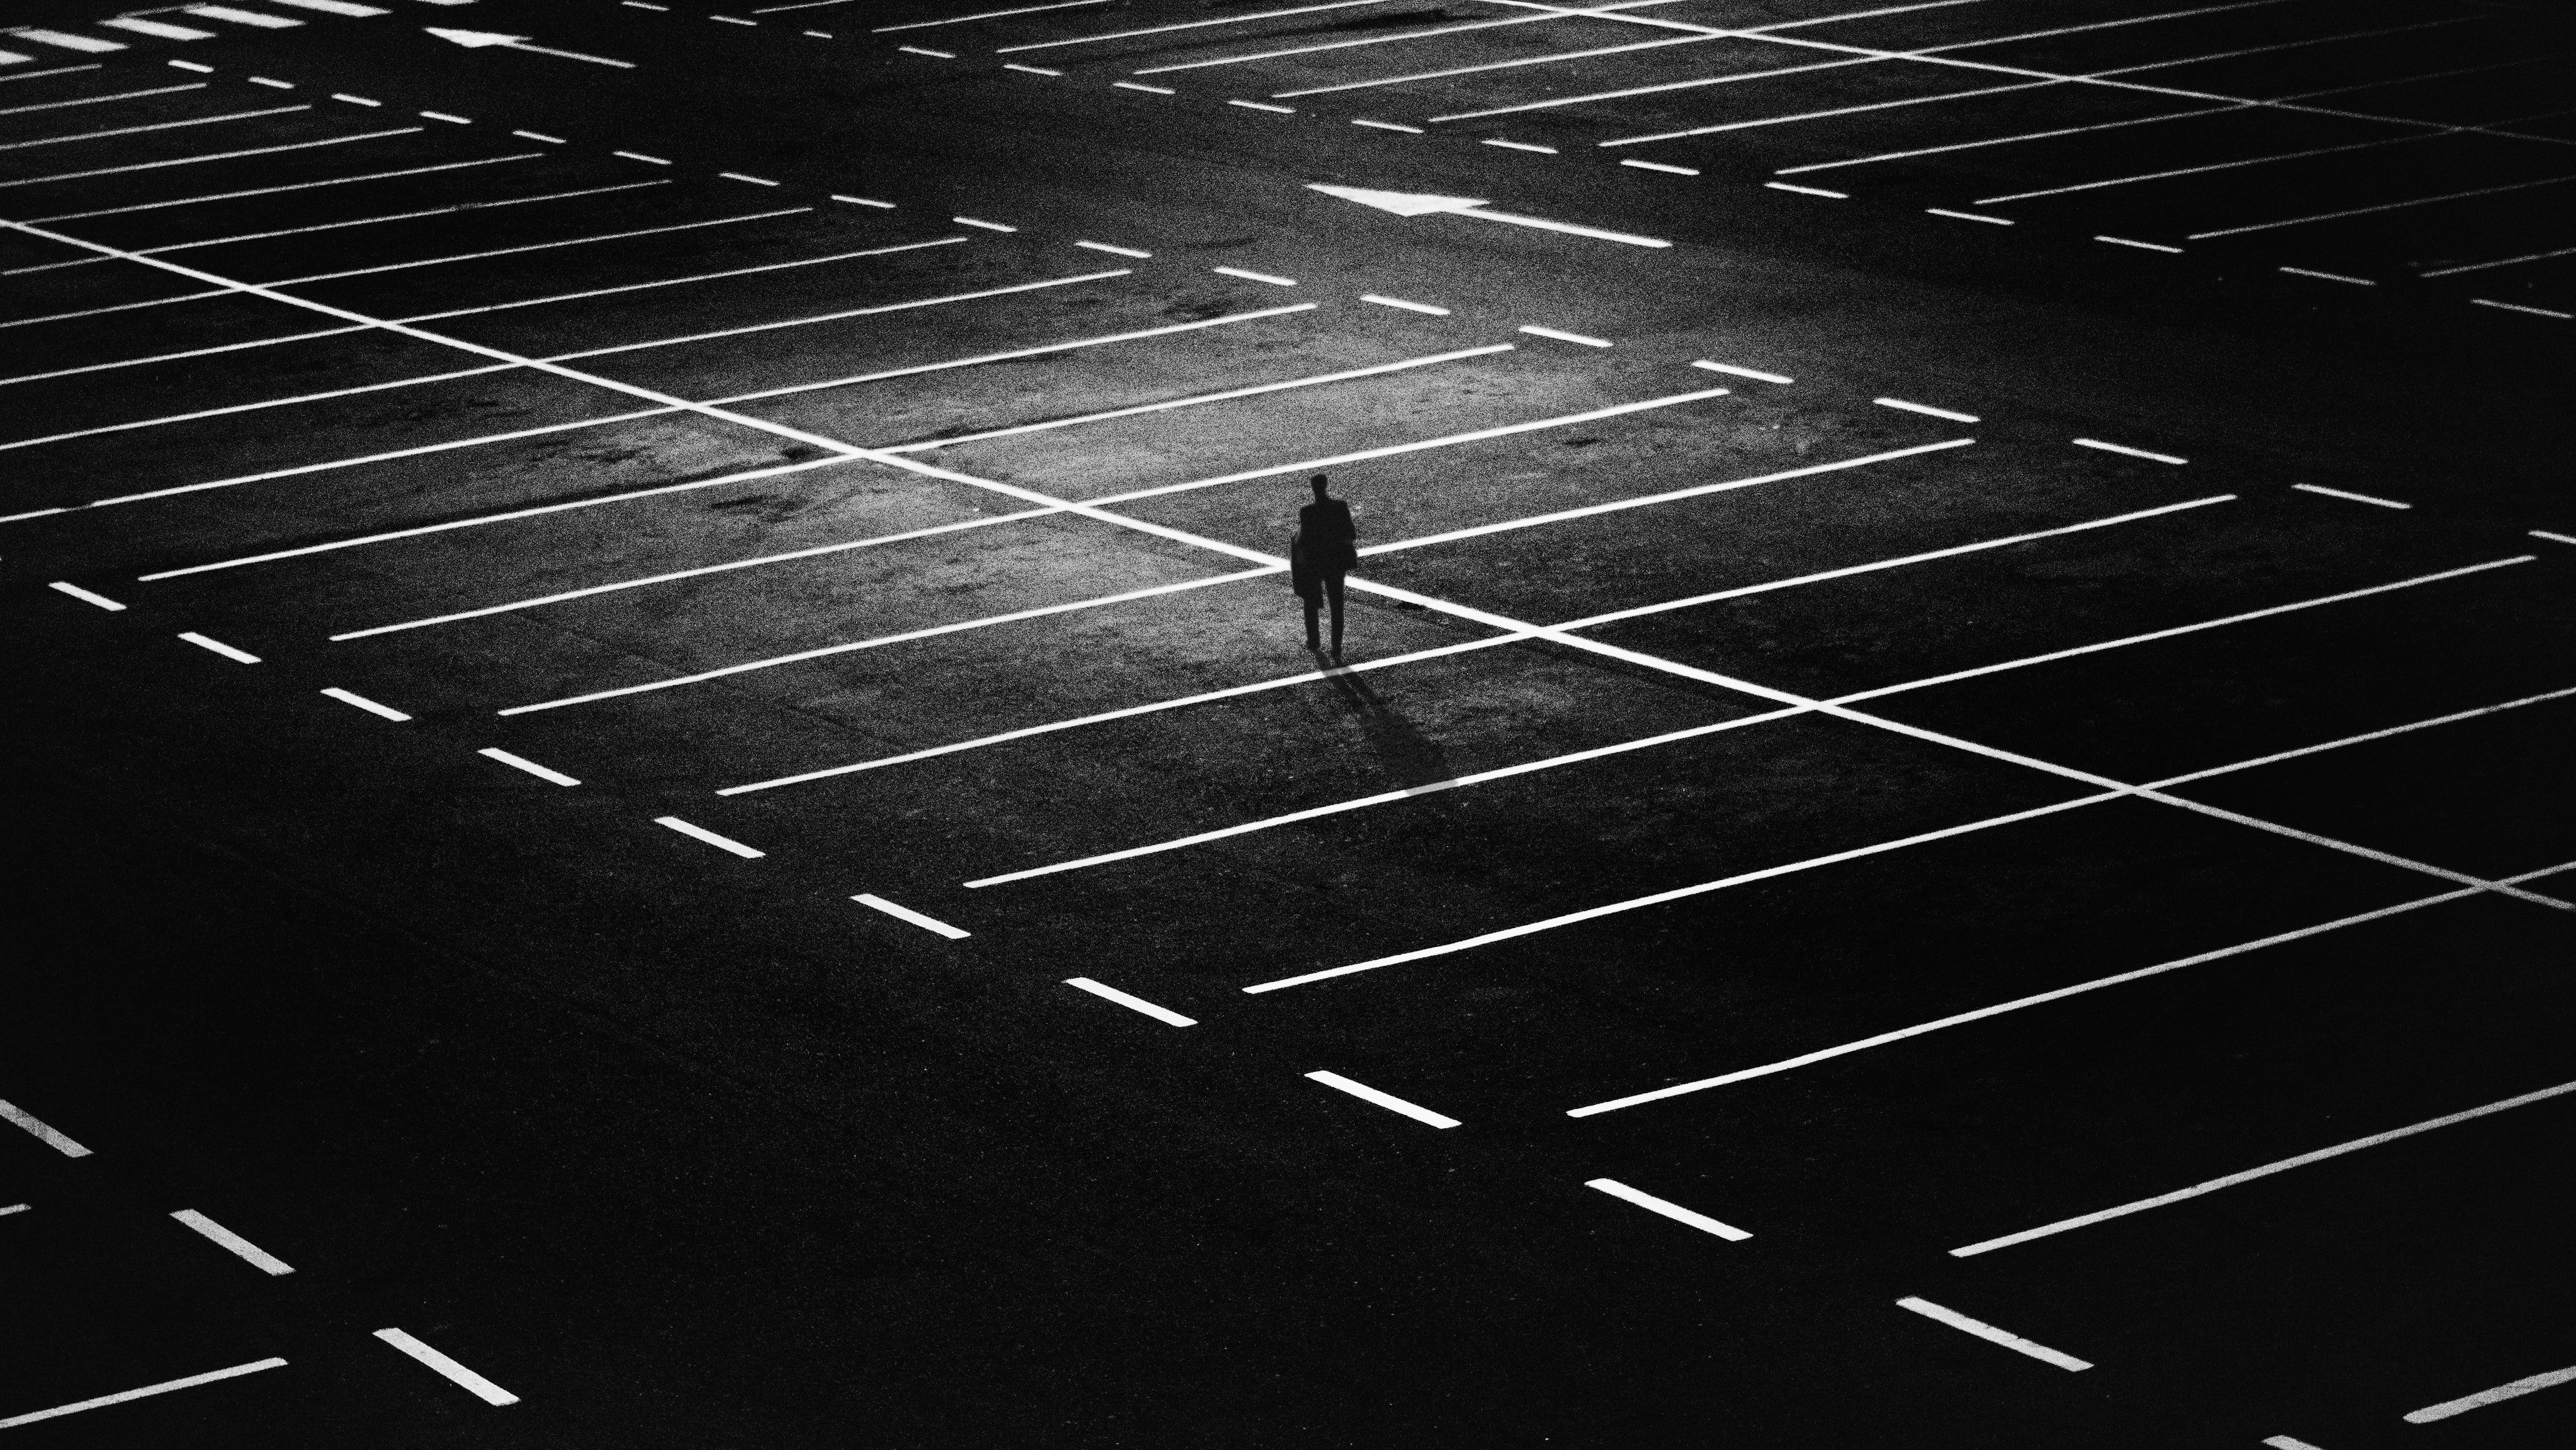 Pictured - A man standing on an empty parking lot | Source: Pexles 